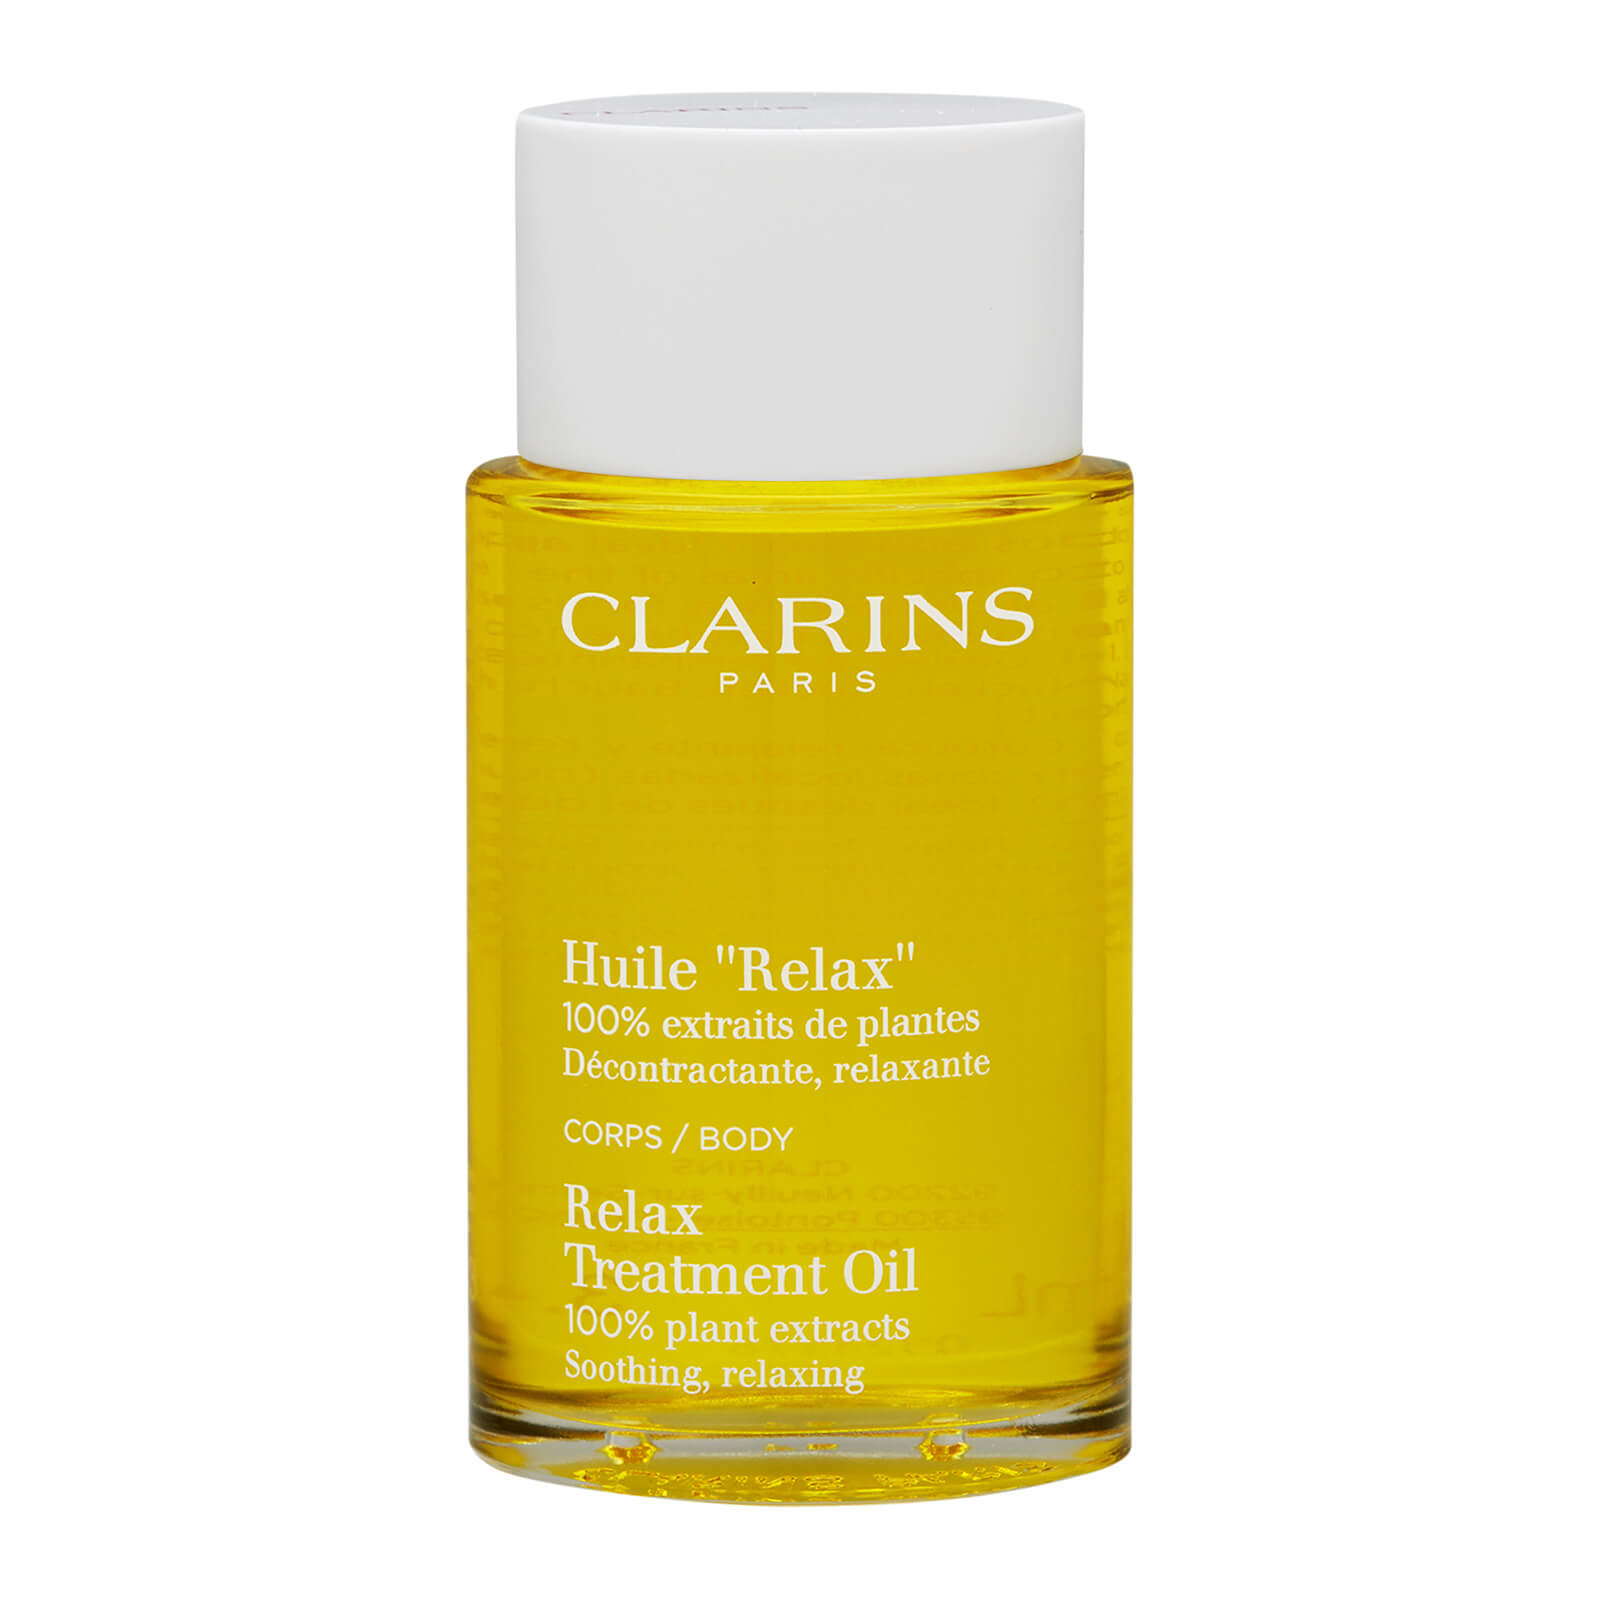 Relax Treatment Oil (Soothing, Relaxing)